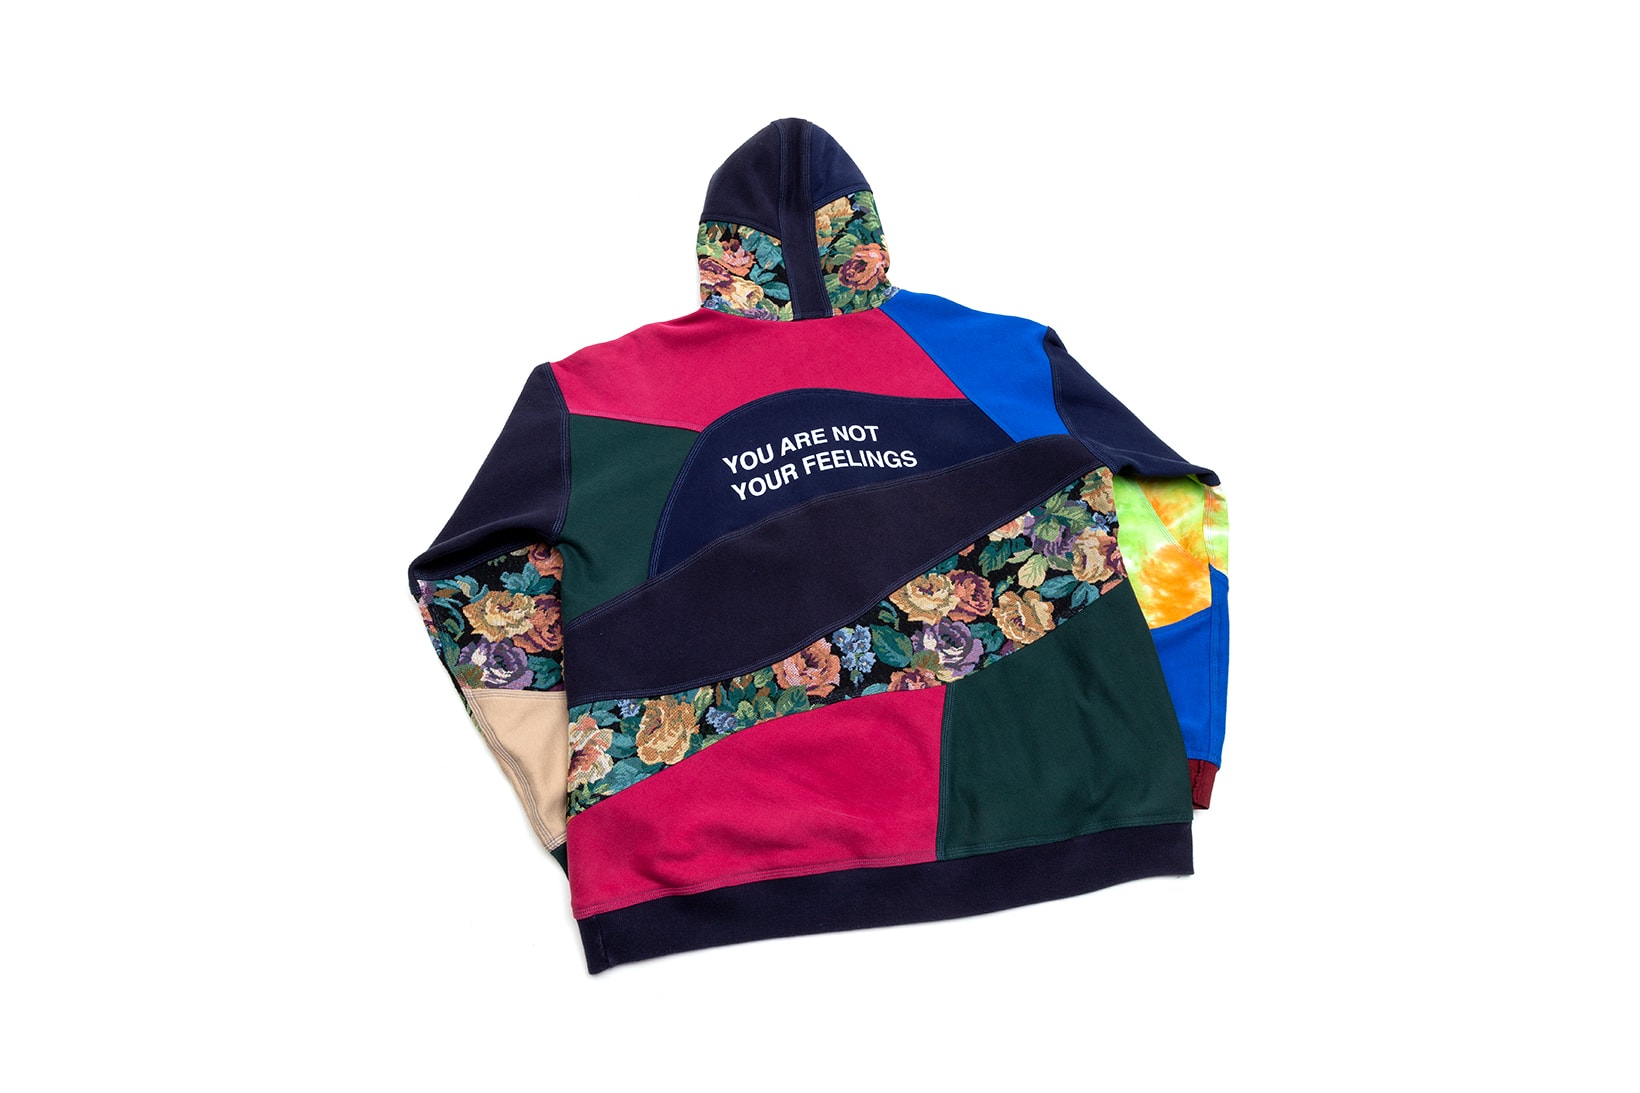 Reebok Justin Mensinger Pieces of Us Mental Health Upcycle Collaboration Floral Sweatshirt Back Release Info